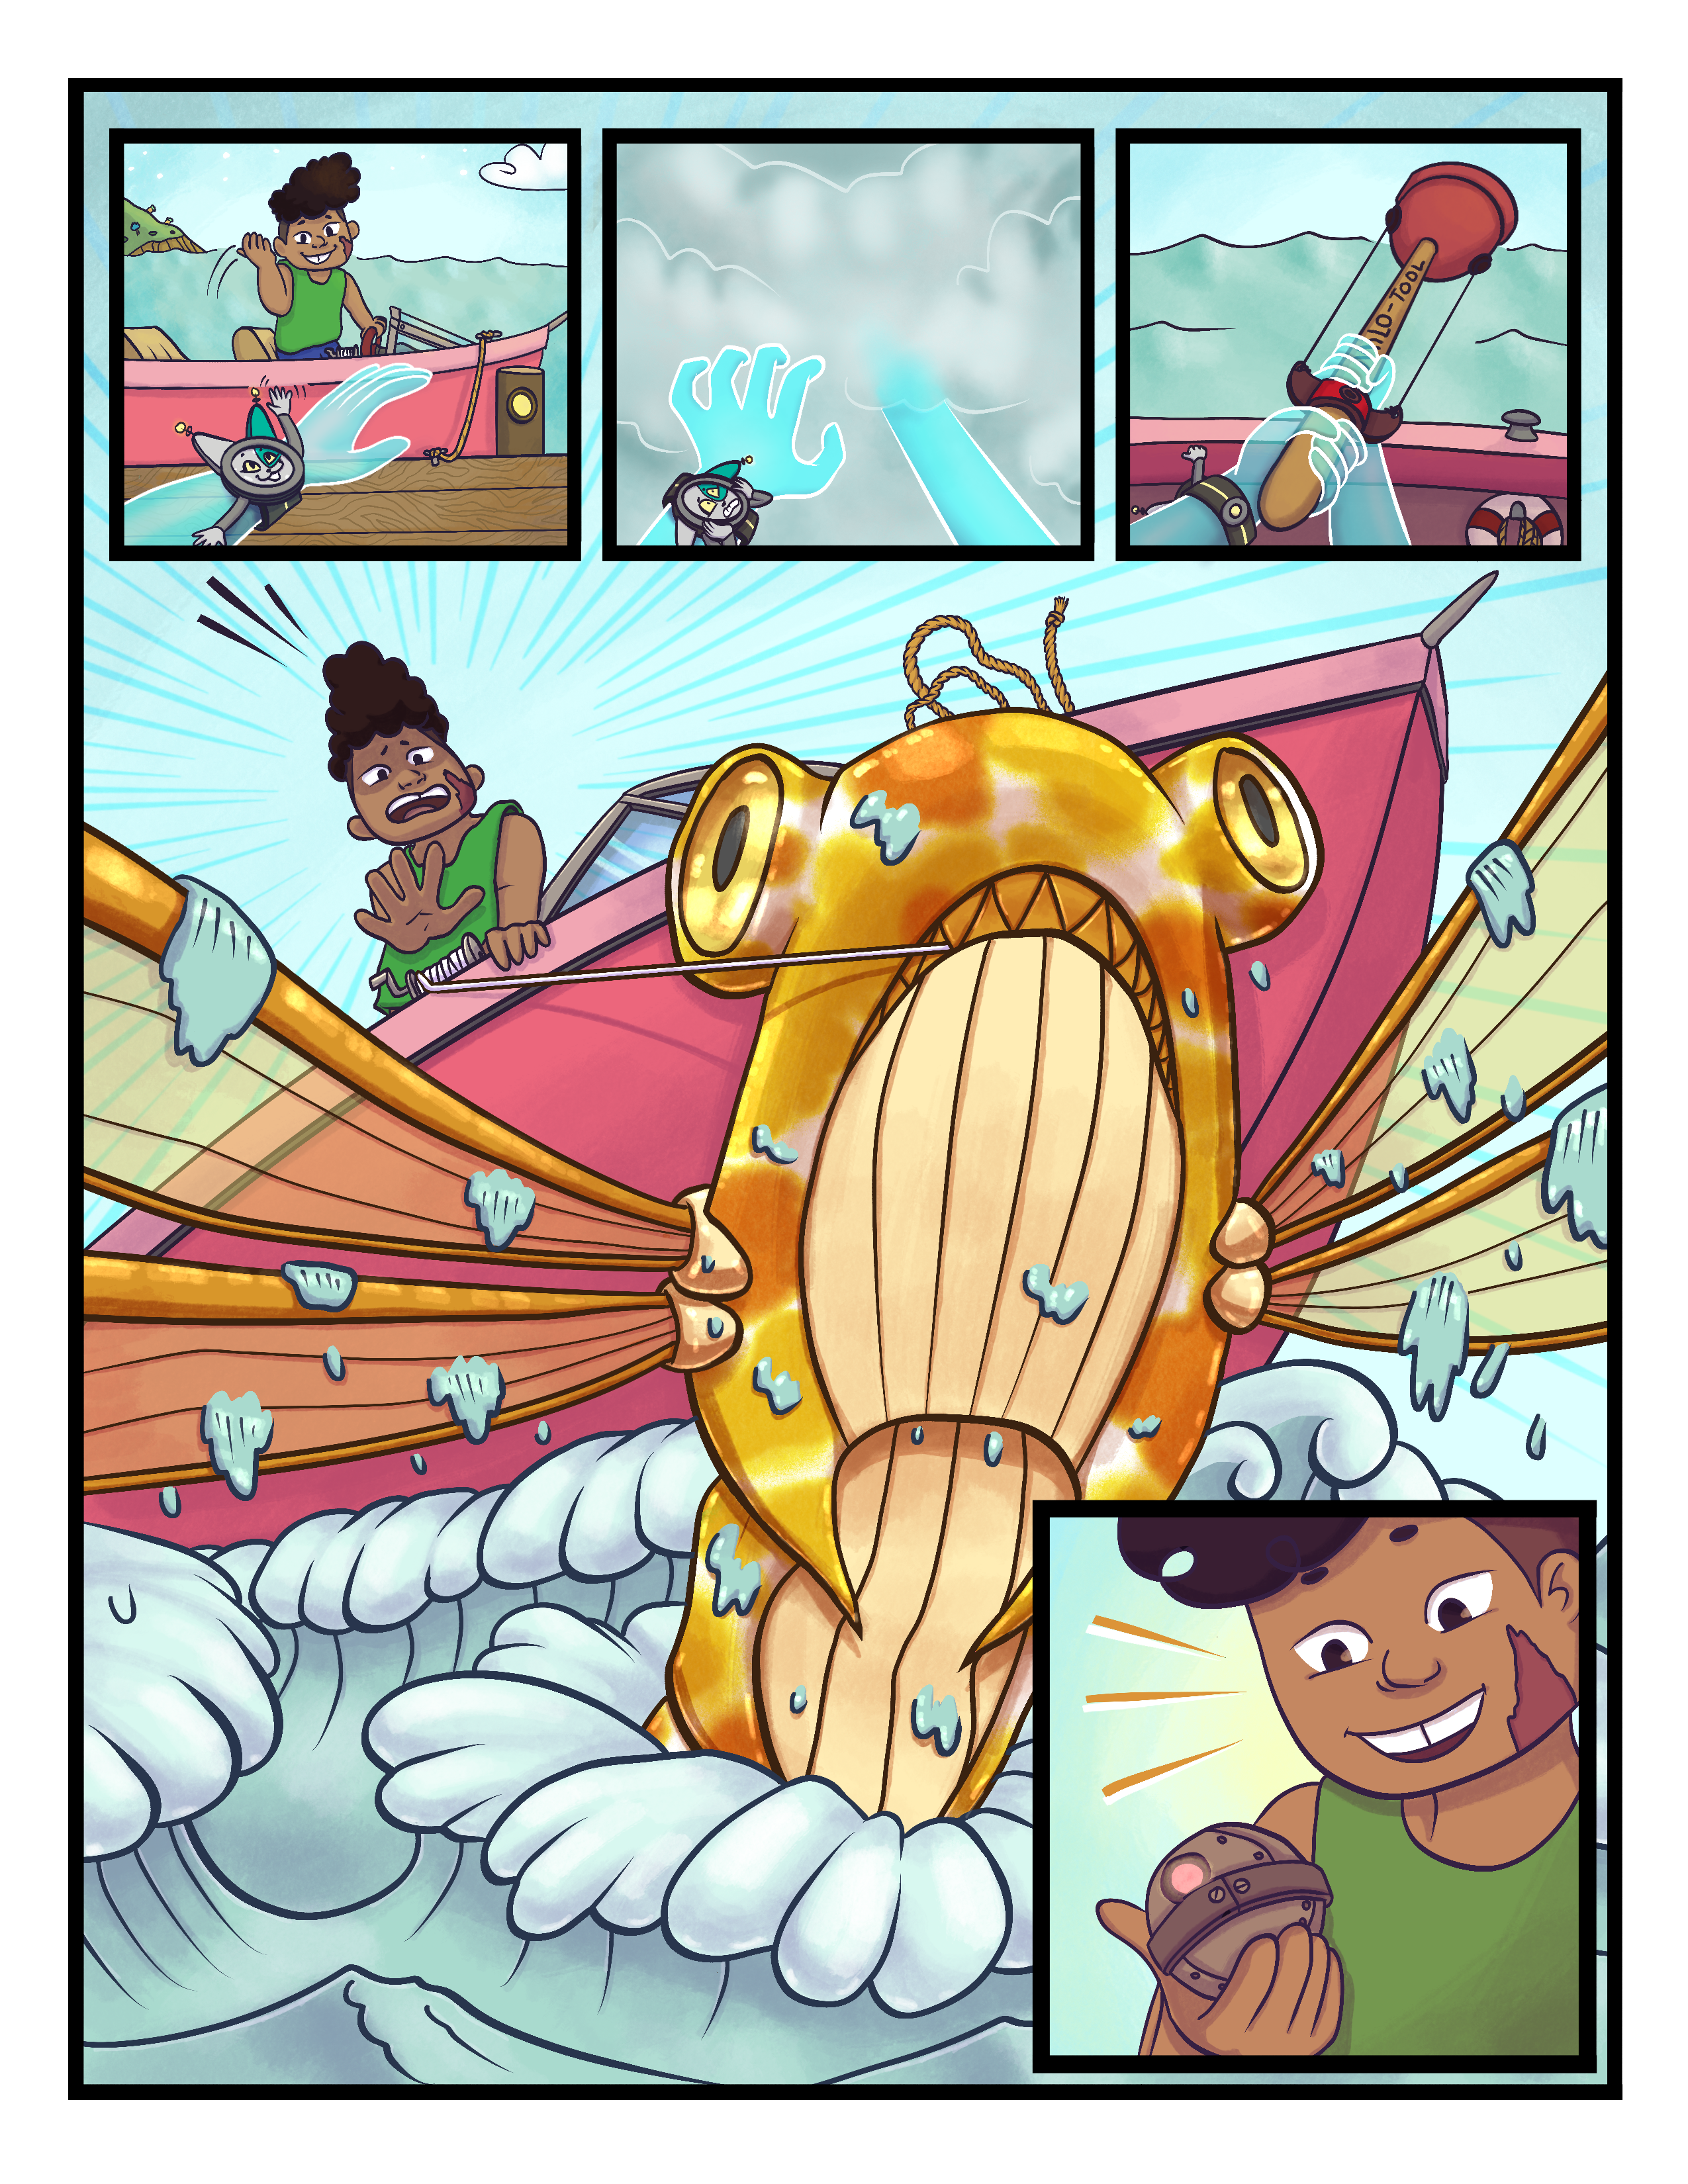 The Milo-Tool success version of the Docks comic page!